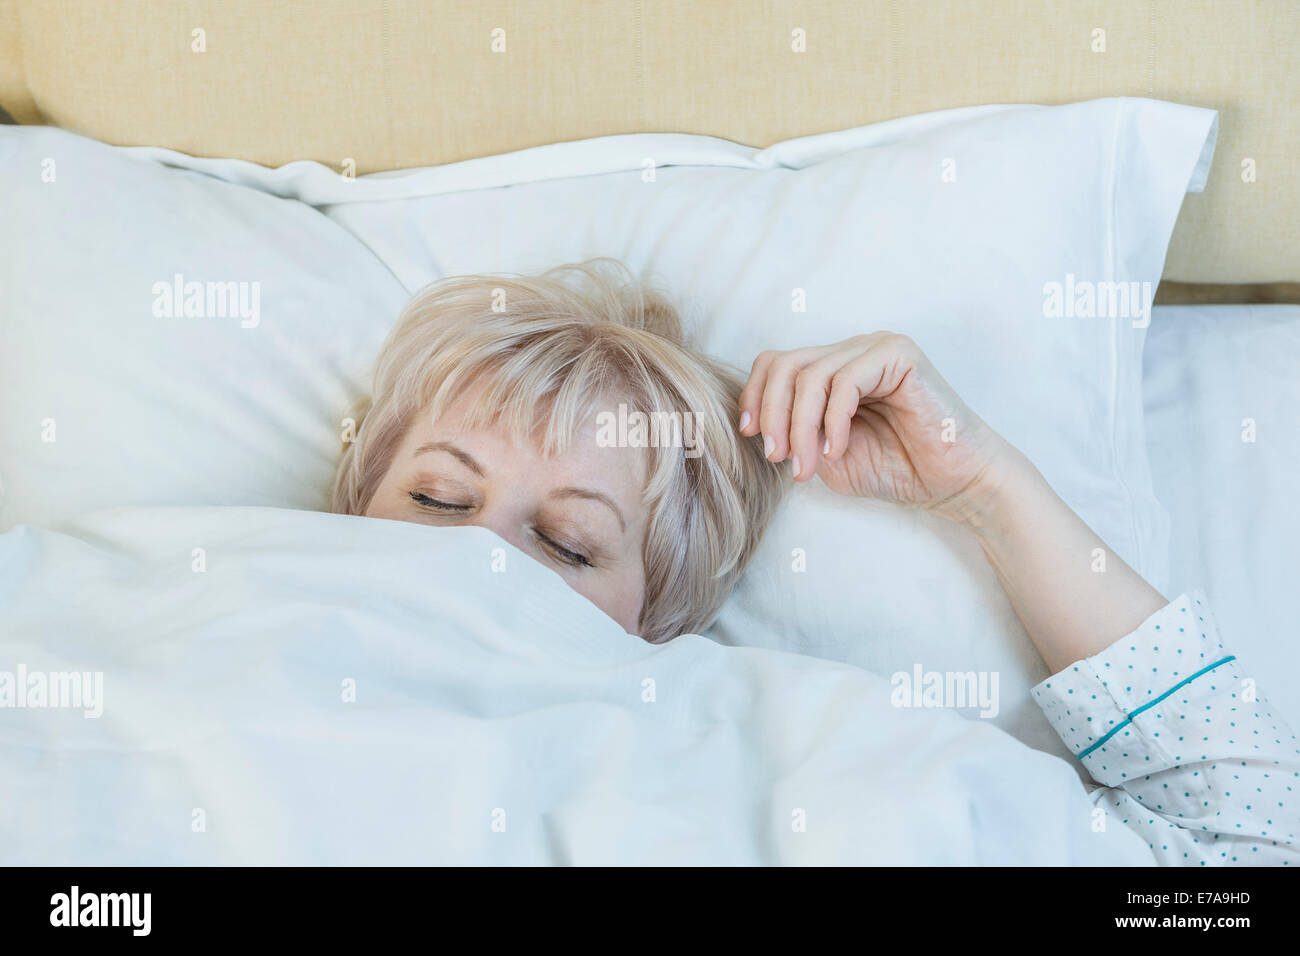 Young woman sleeping in bed Banque D'Images